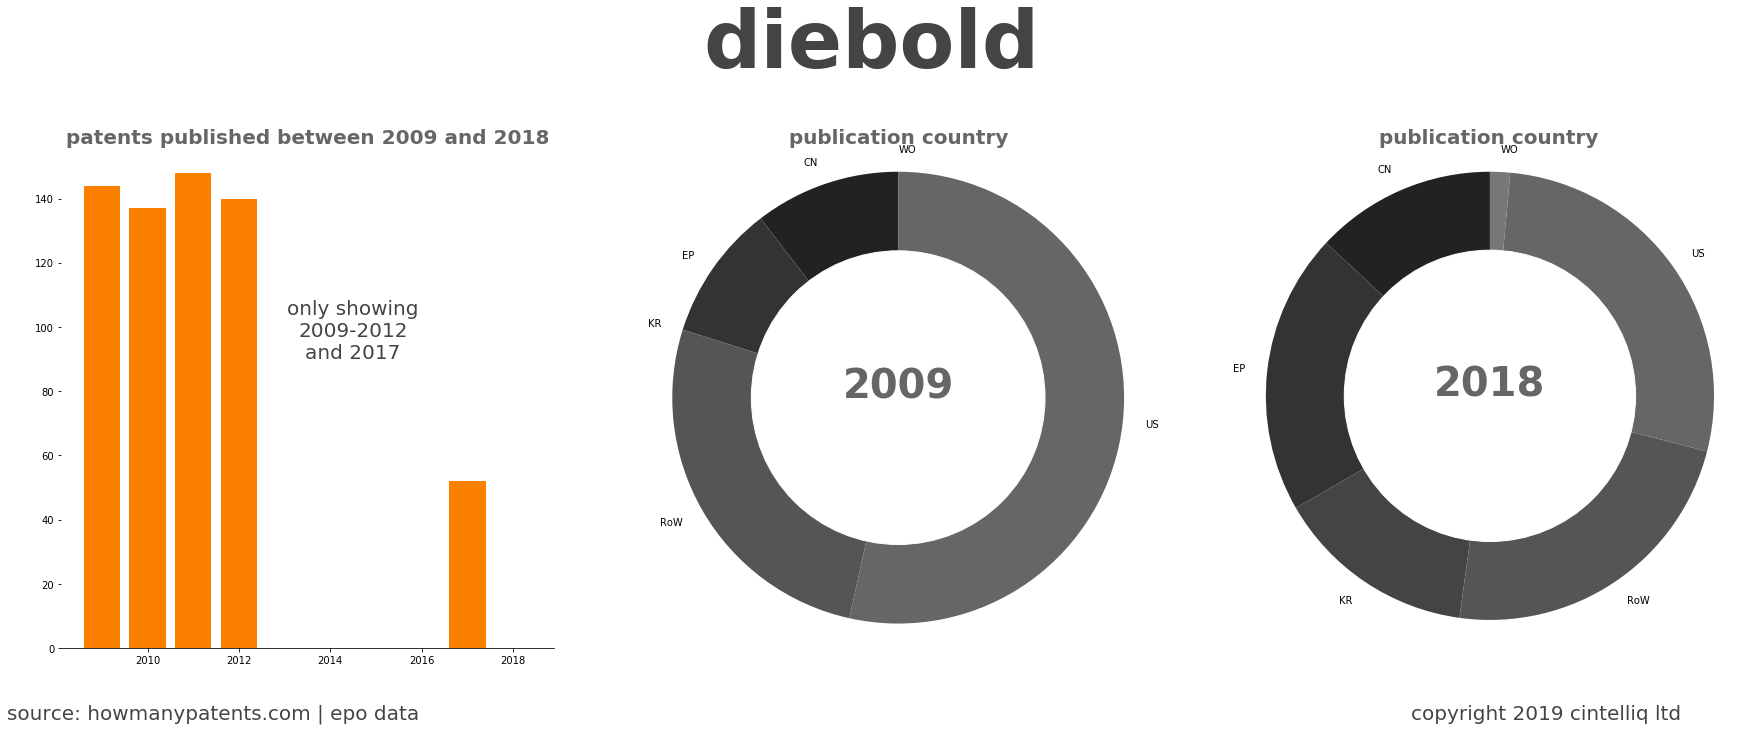 summary of patents for Diebold